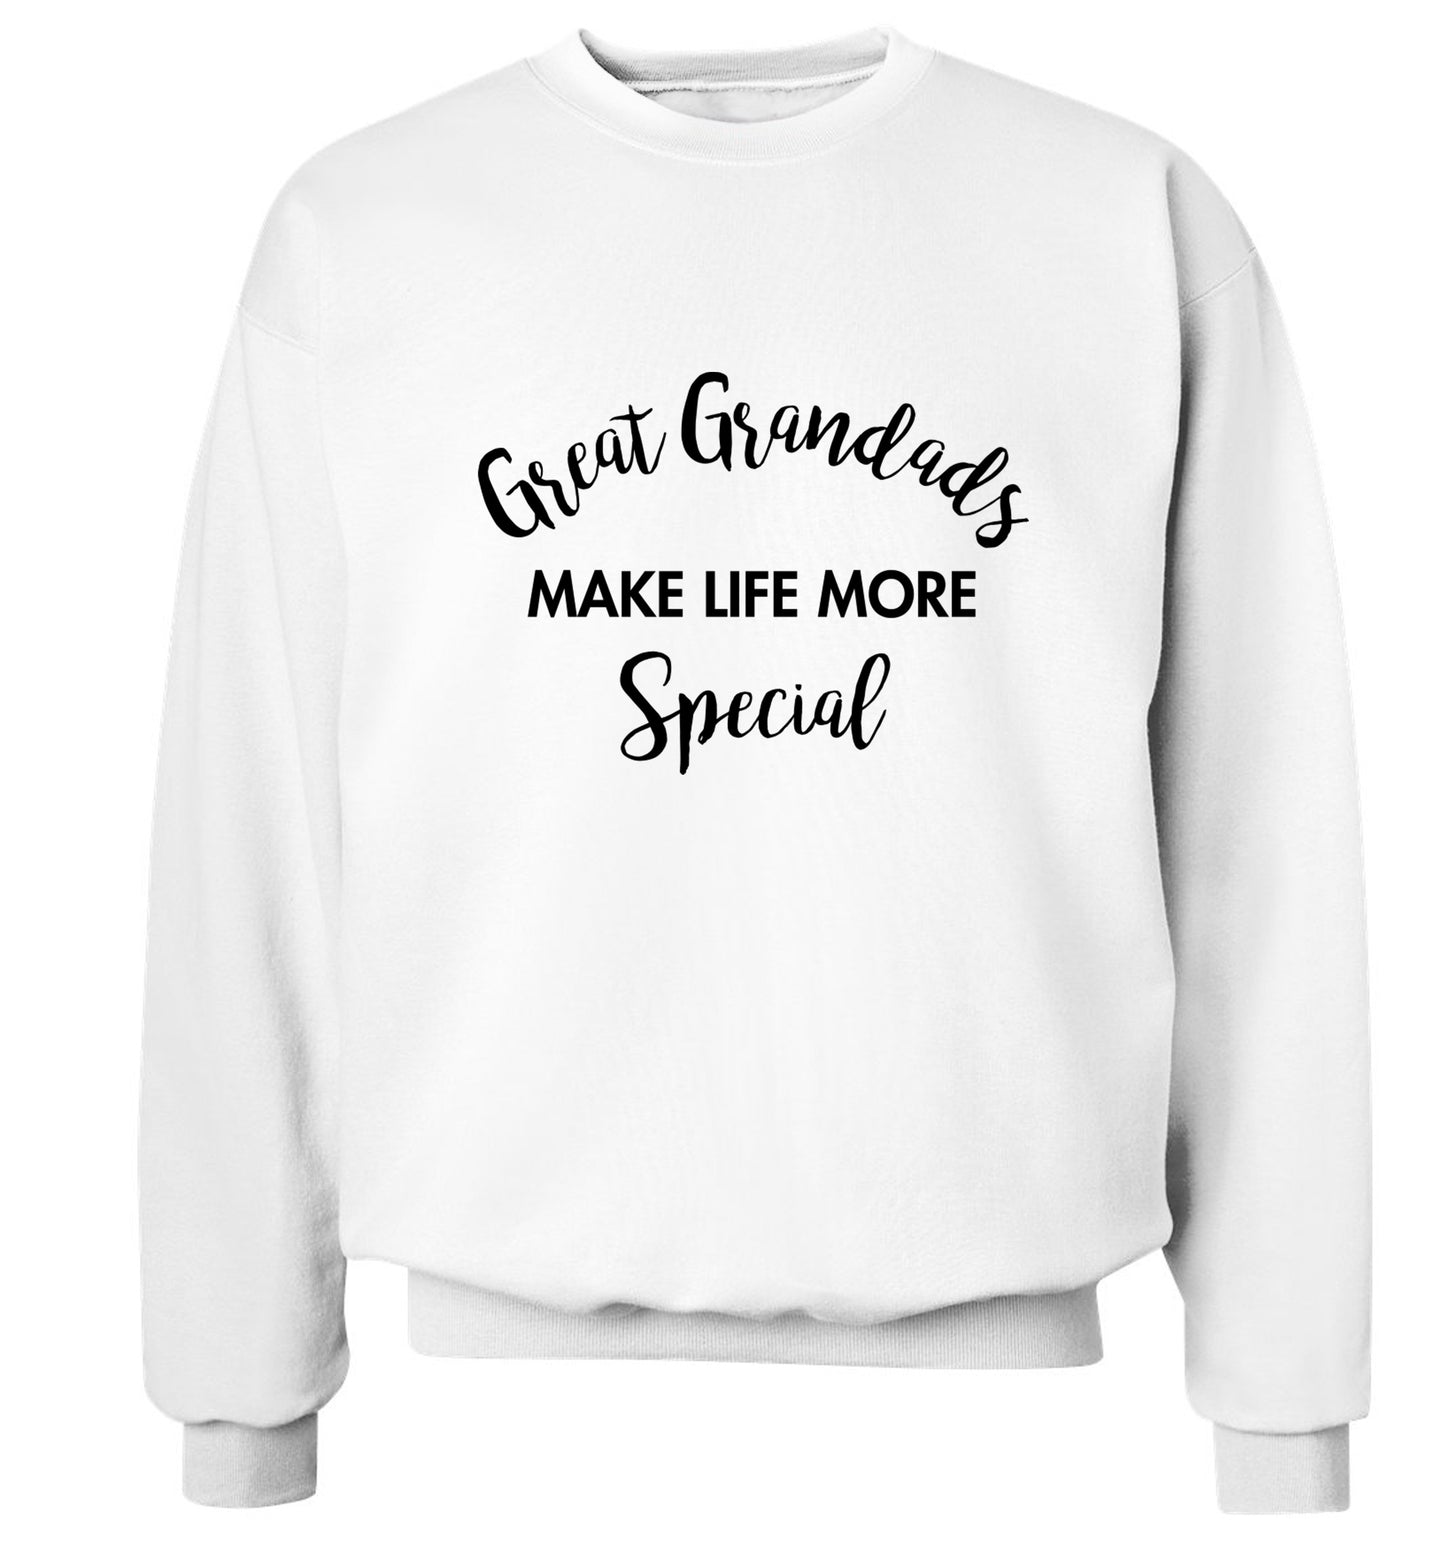 Great Grandads make life more special Adult's unisex white Sweater 2XL